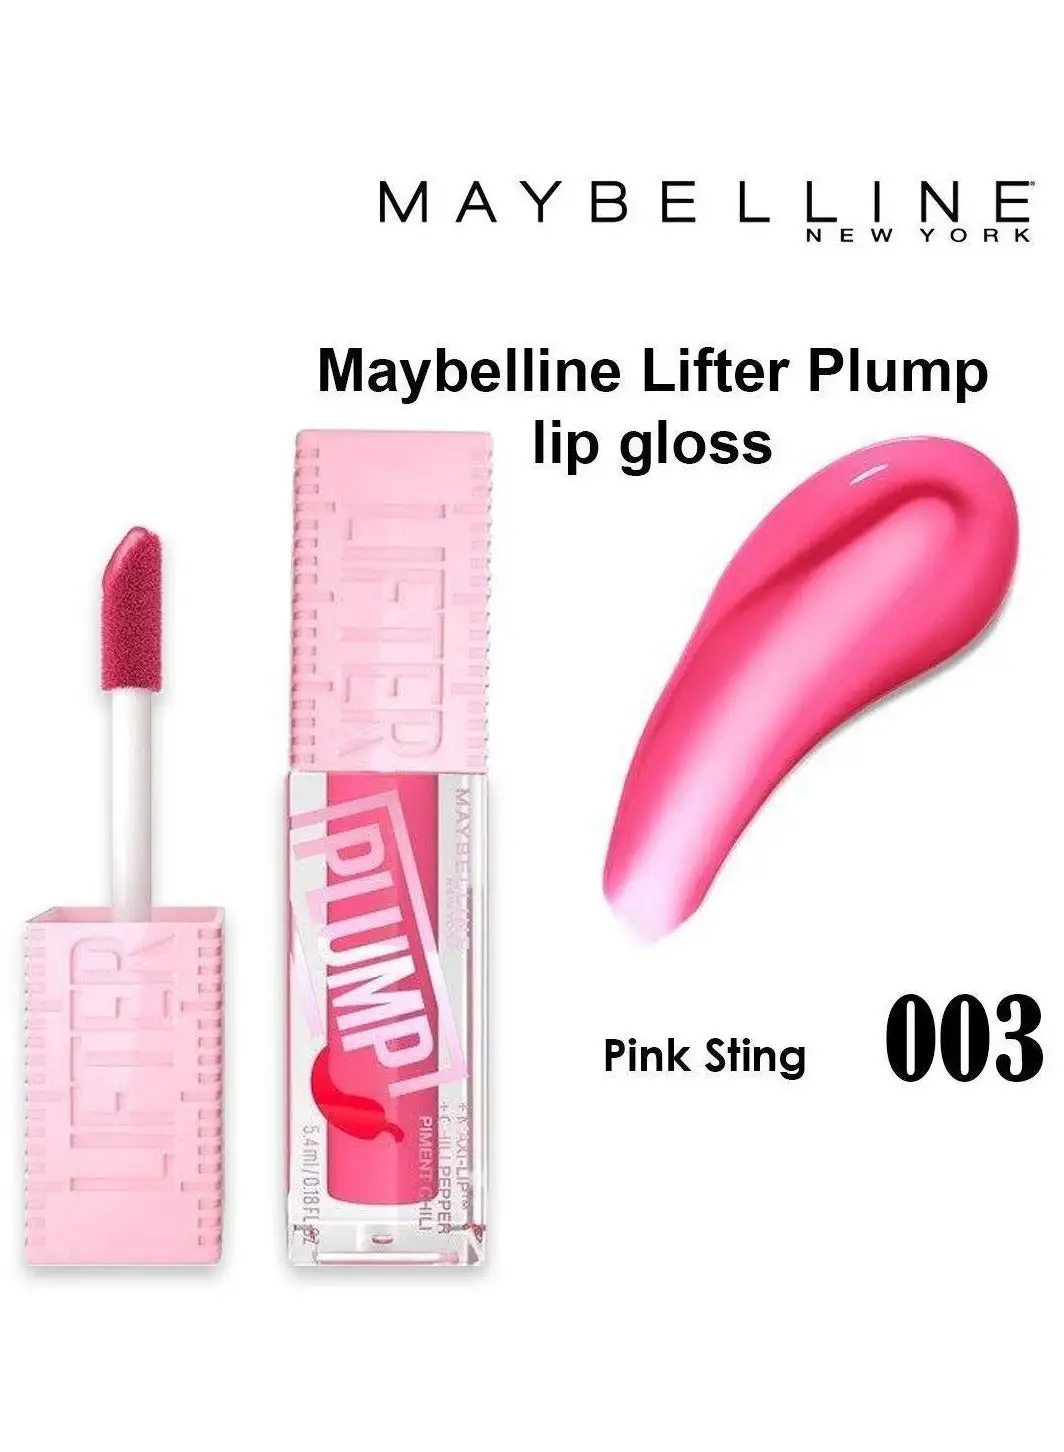 MAYBELLINE NEW YORK Lifter Plump, Hydrating Lip Plumping Gloss with Chilli Pepper - Pink Sting